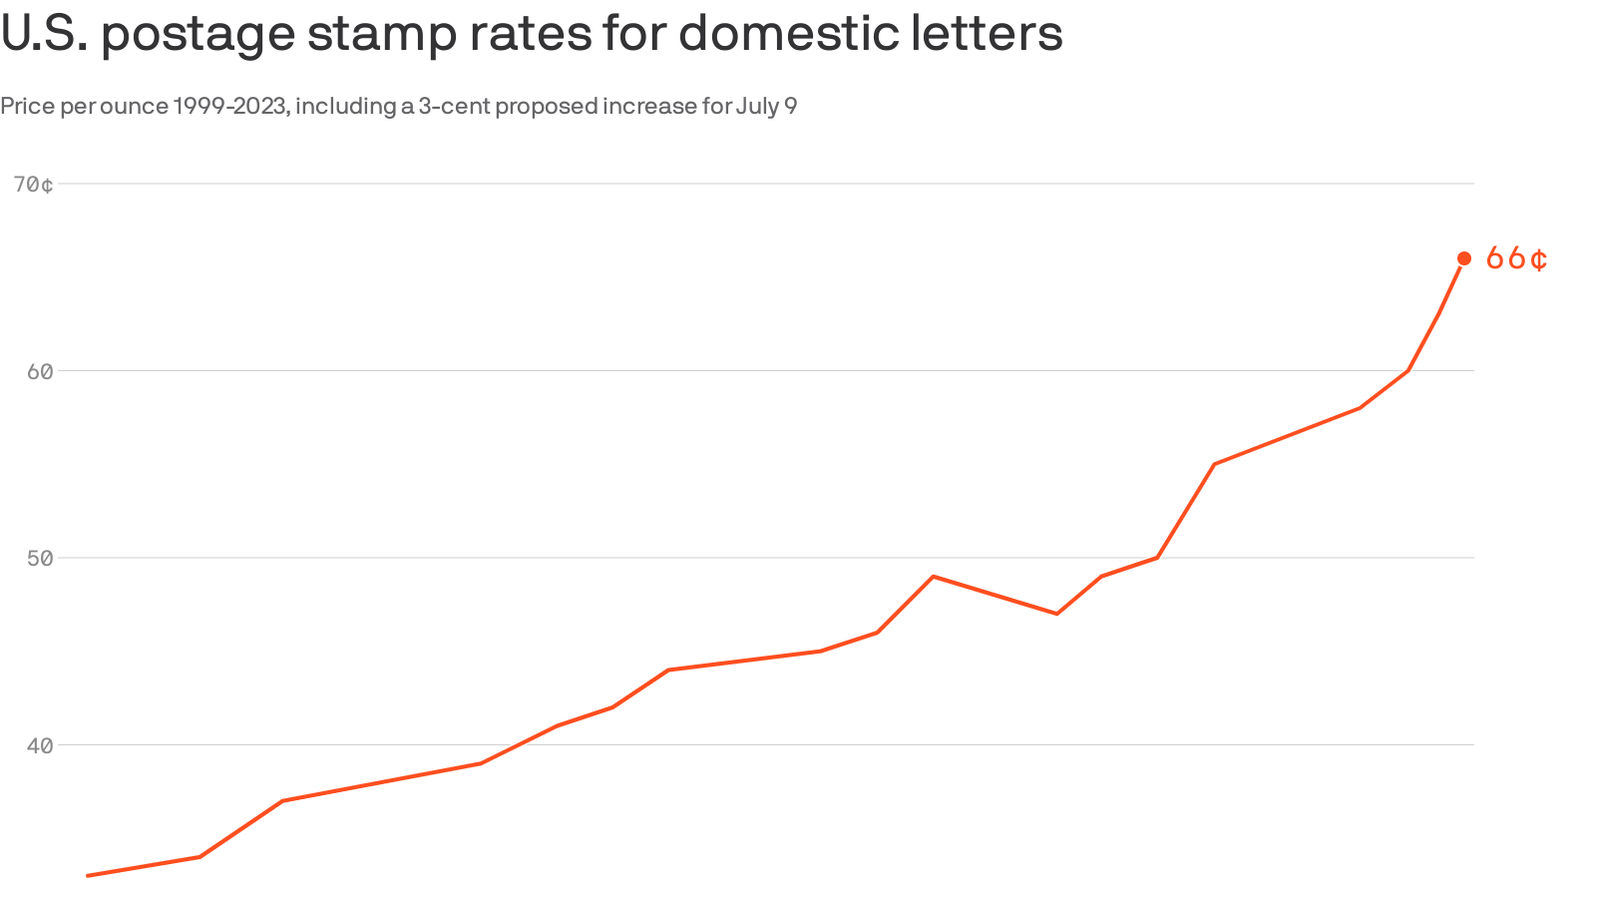 Stamp Prices Have Gone Up for the Second Time This Year - CNET